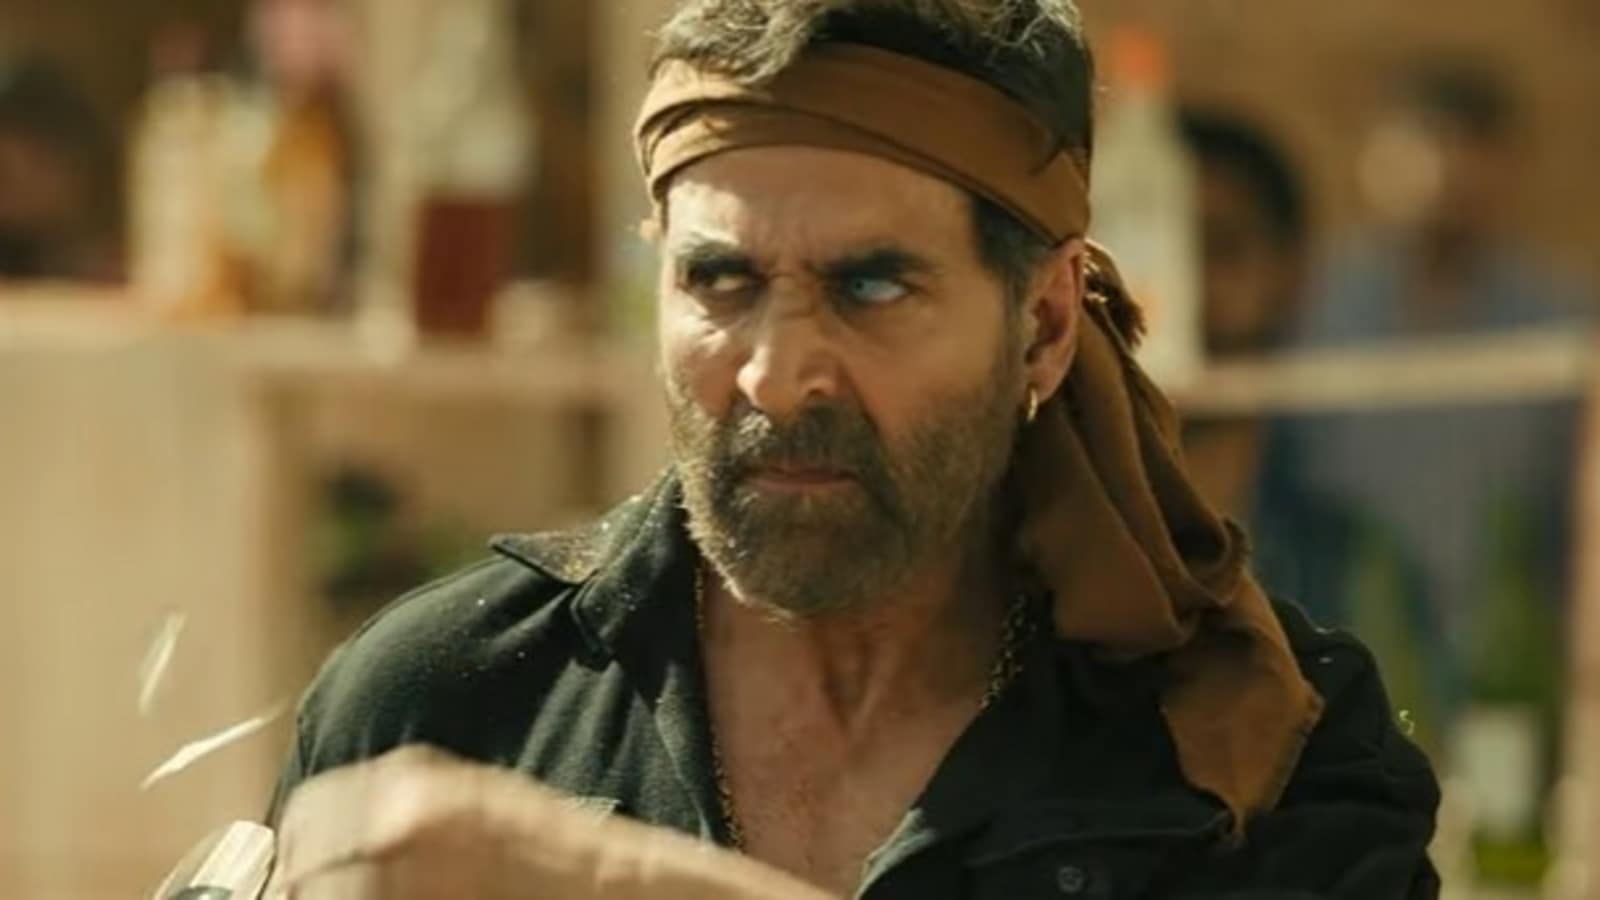 Bachchhan Paandey box office day 2 collection: Akshay Kumar’s film collects ₹12 crore, hit by The Kashmir Files wave